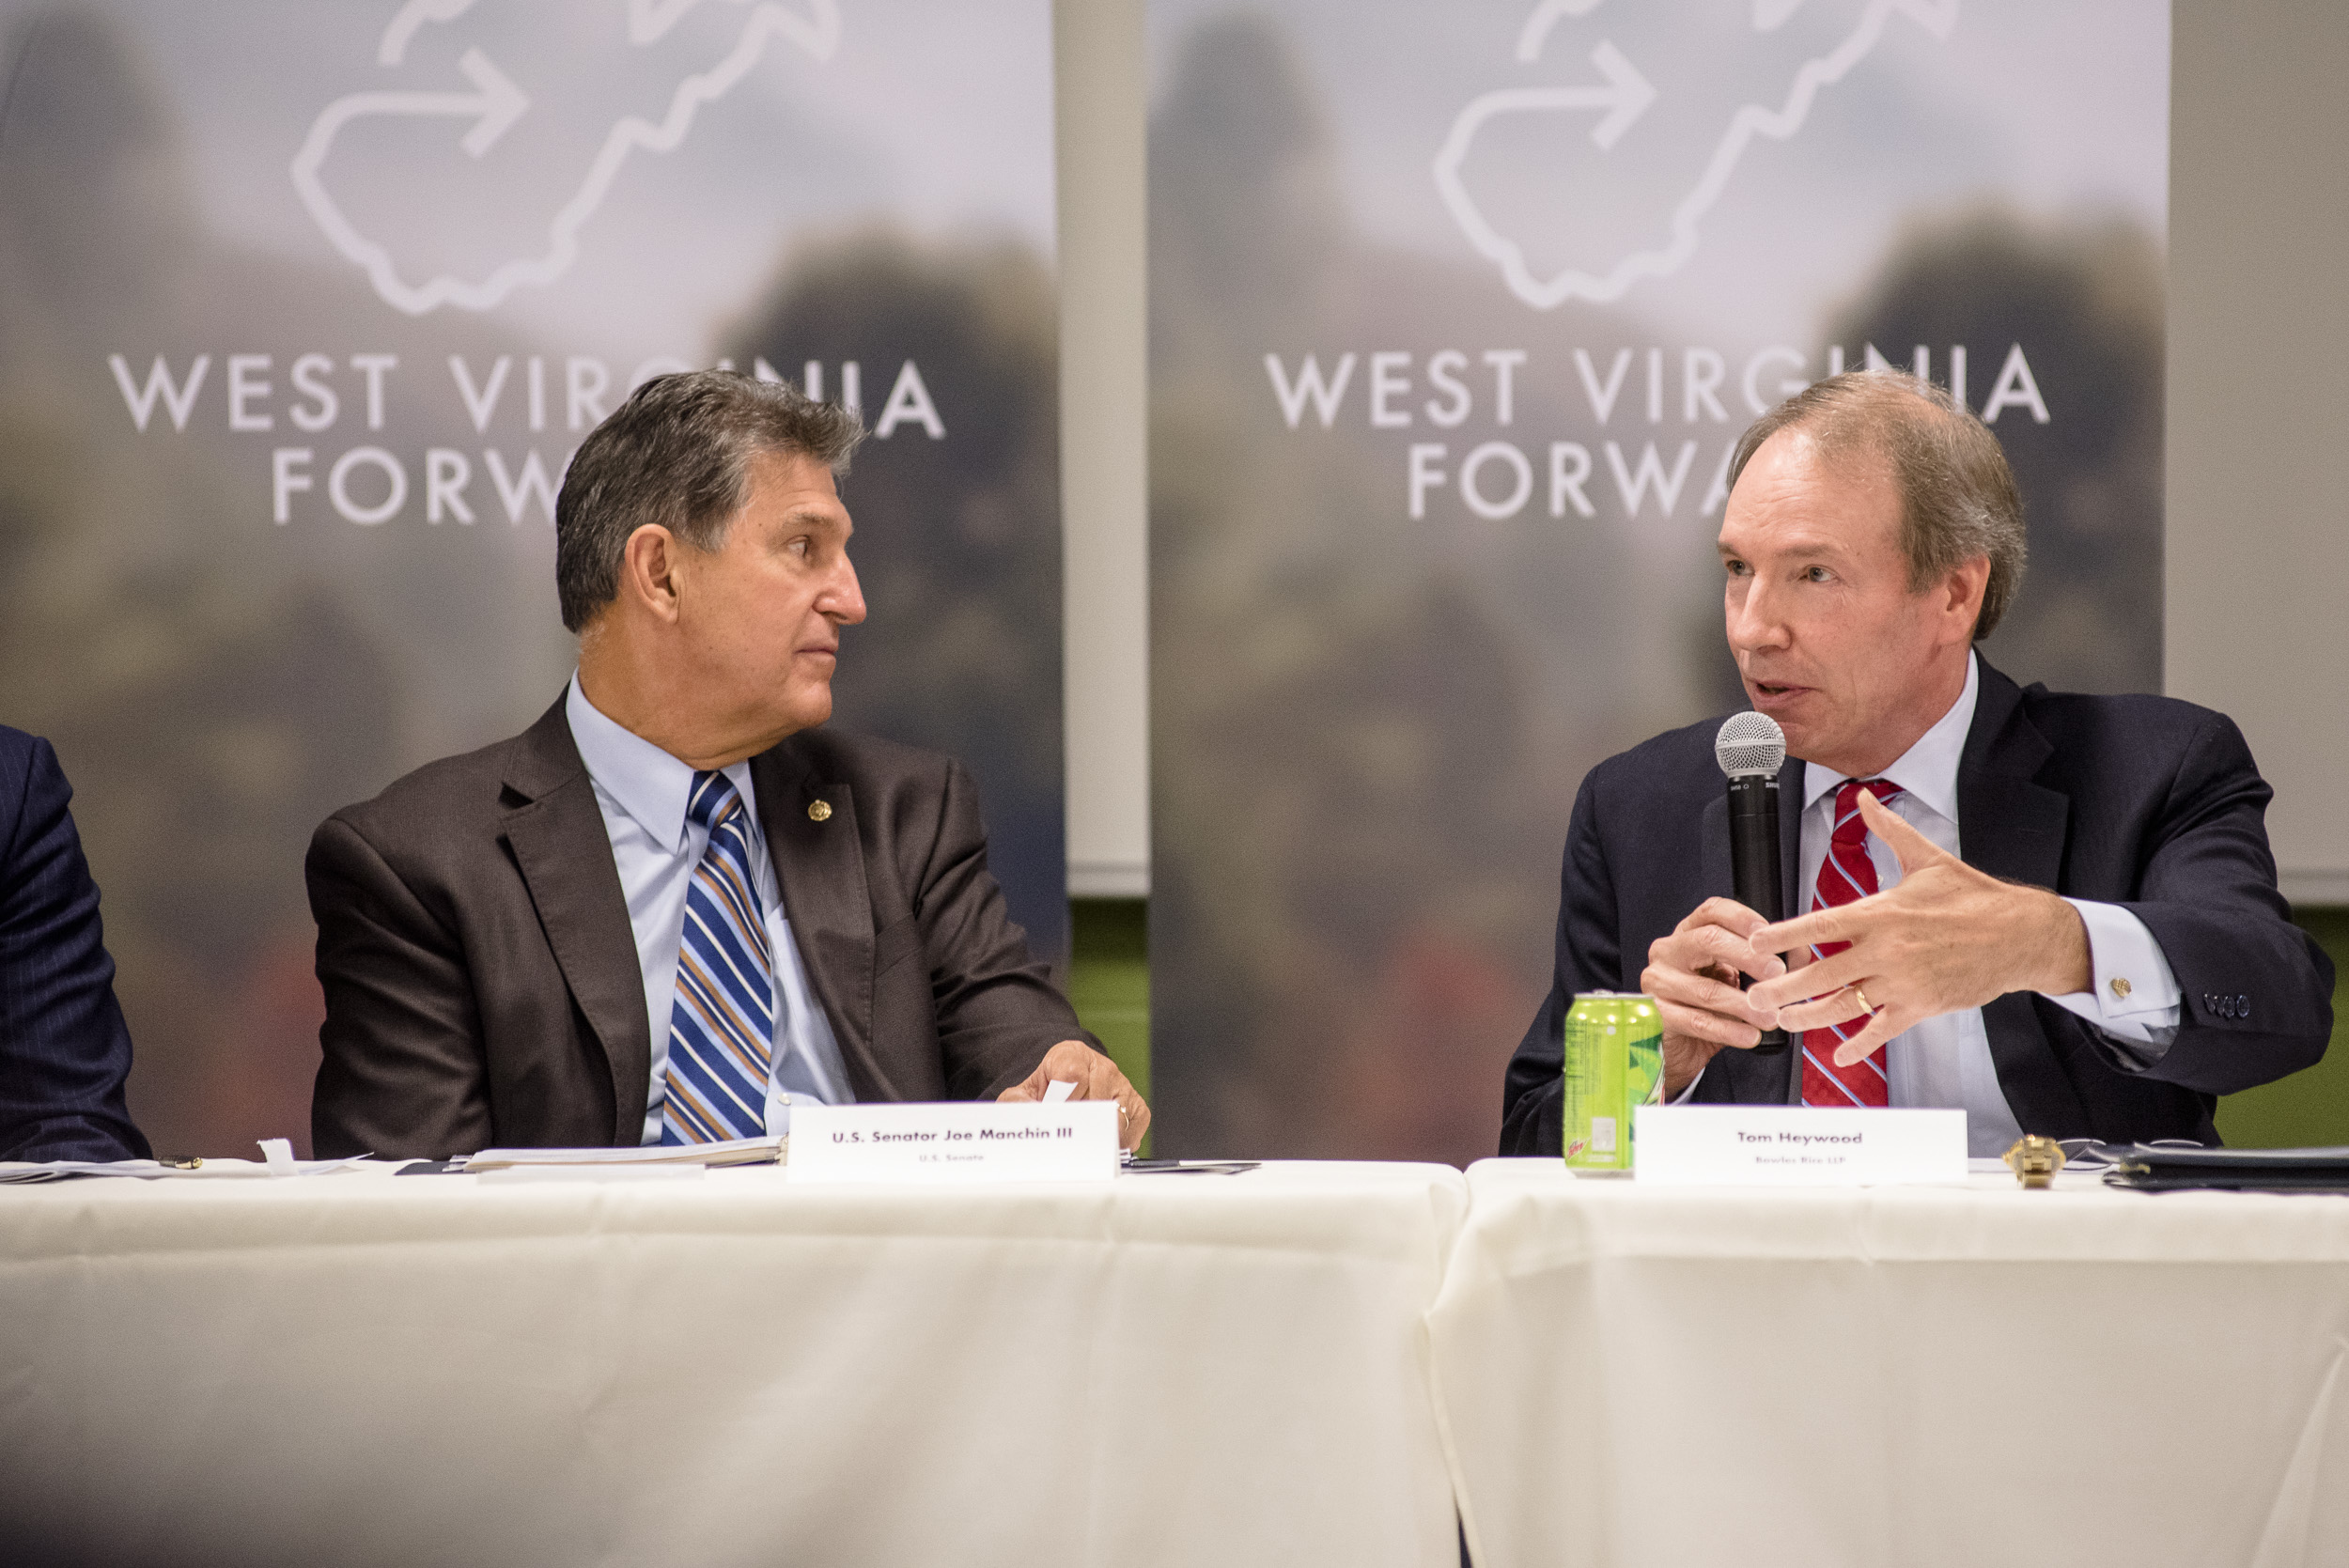 US Senator Joe Manchin and DRWV Foundation board member, Tom Heywood, join a roundtable discussion on reducing the security clearance backlog in WV.